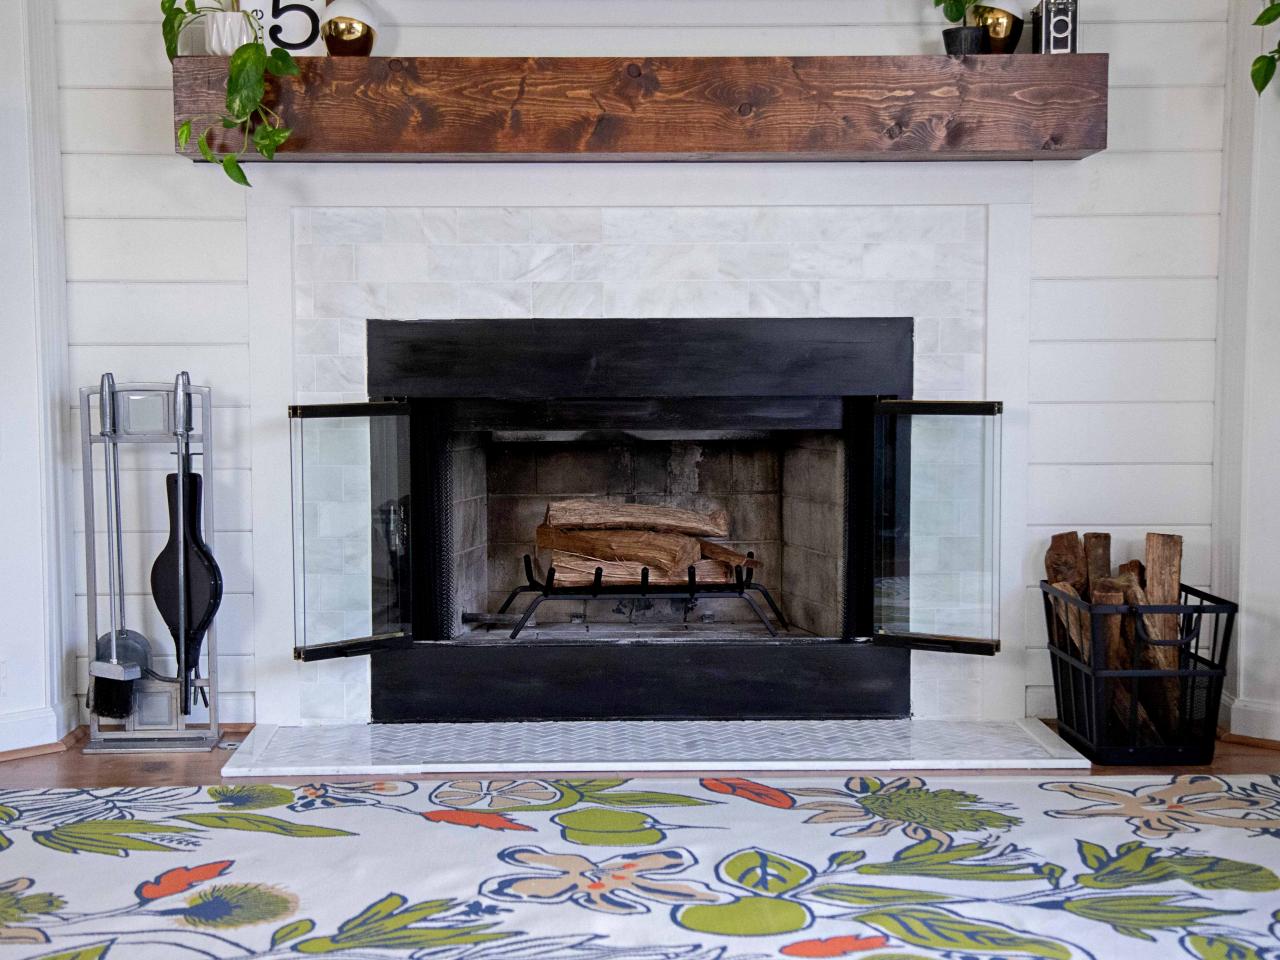 How To Clean A Fireplace, How To Clean Tile Around Fireplace